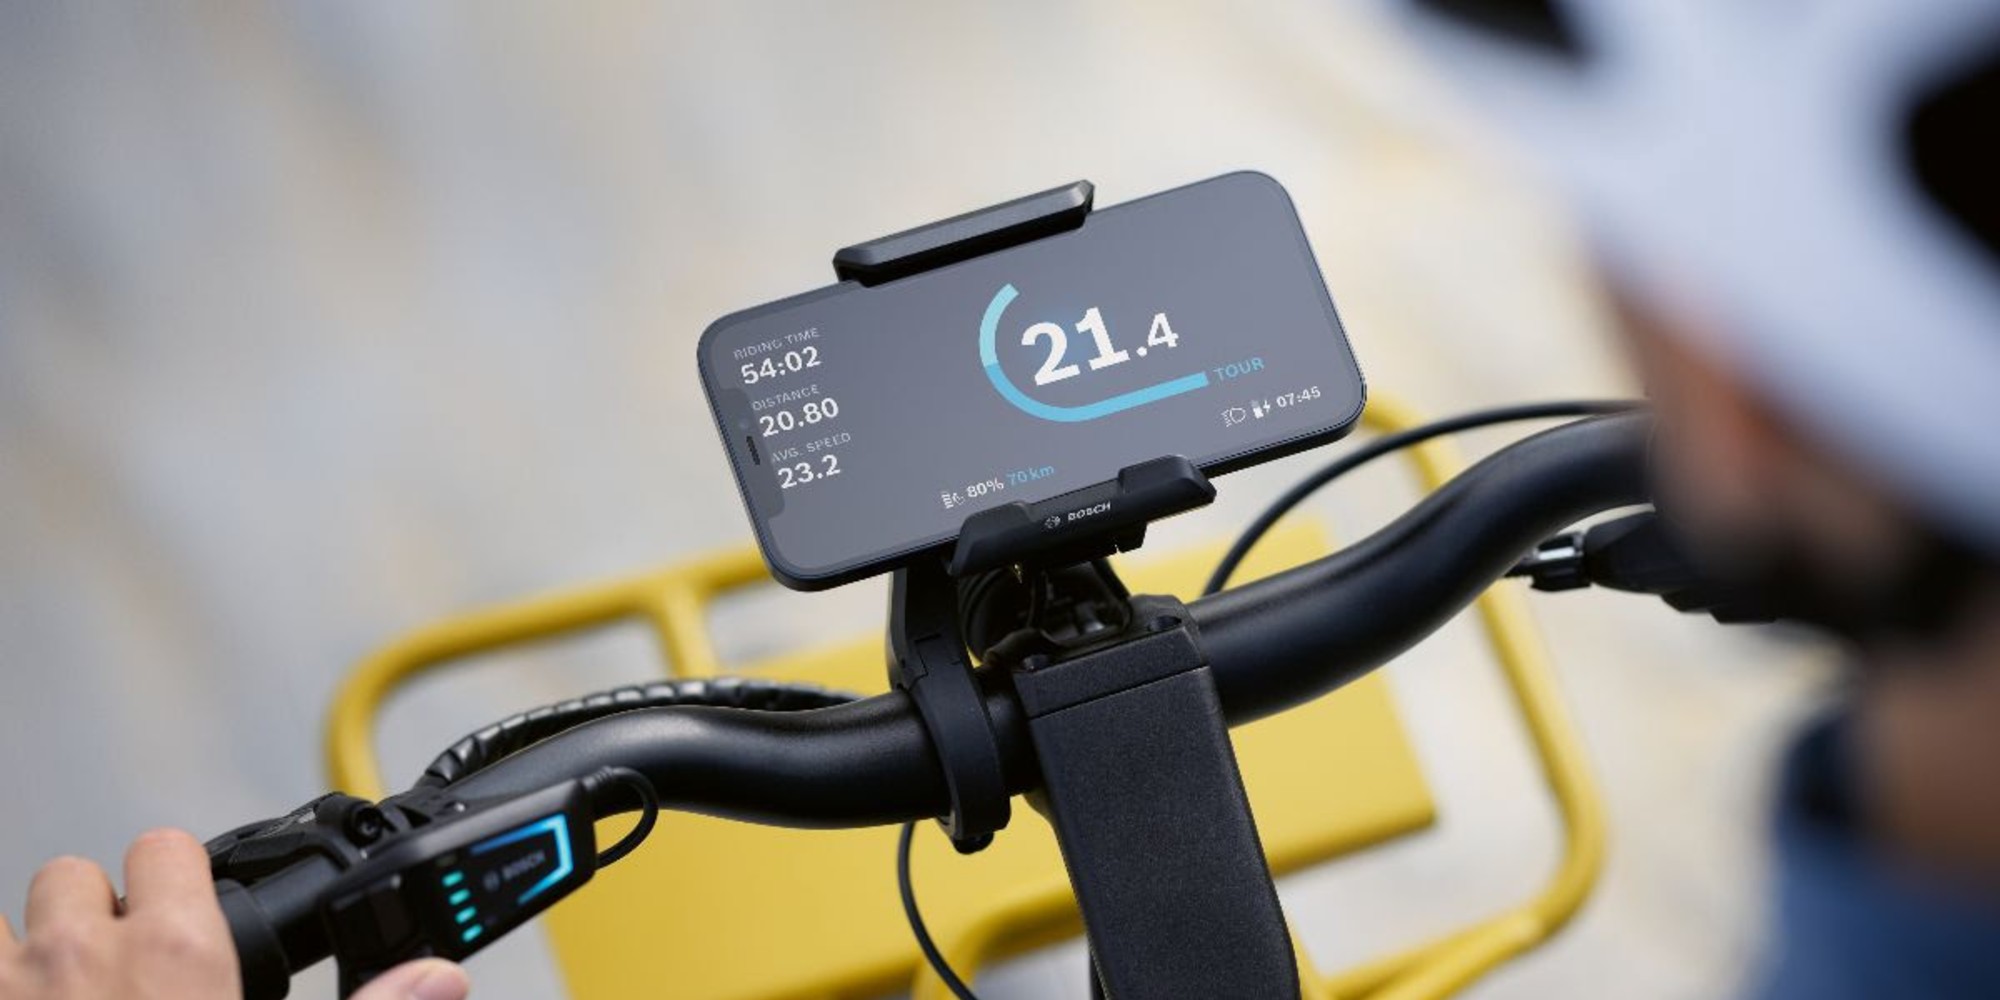 Bosch eBike Systems announces new features and products for its smart  system - Products - BikeBiz